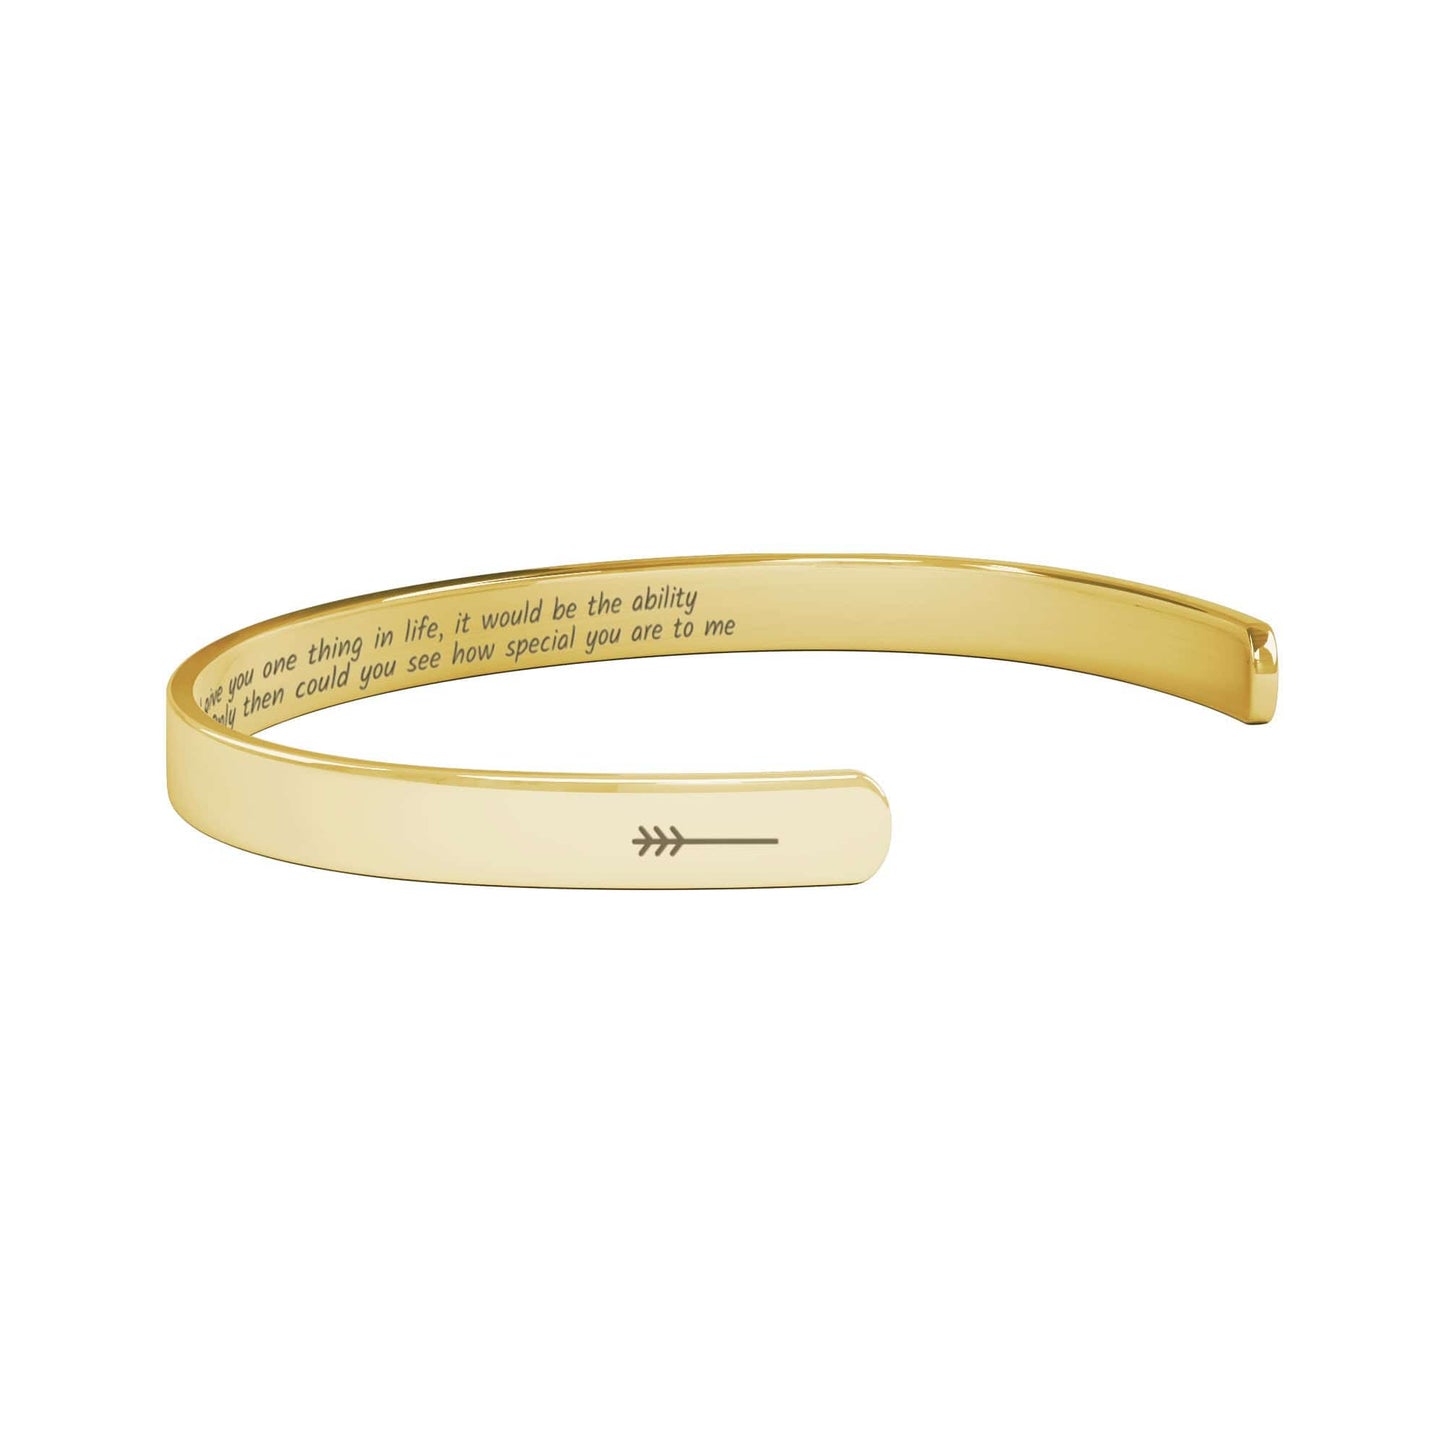 To my Daughter Personalized Engraved Cuff Bracelet, Motivational Jewelry for her